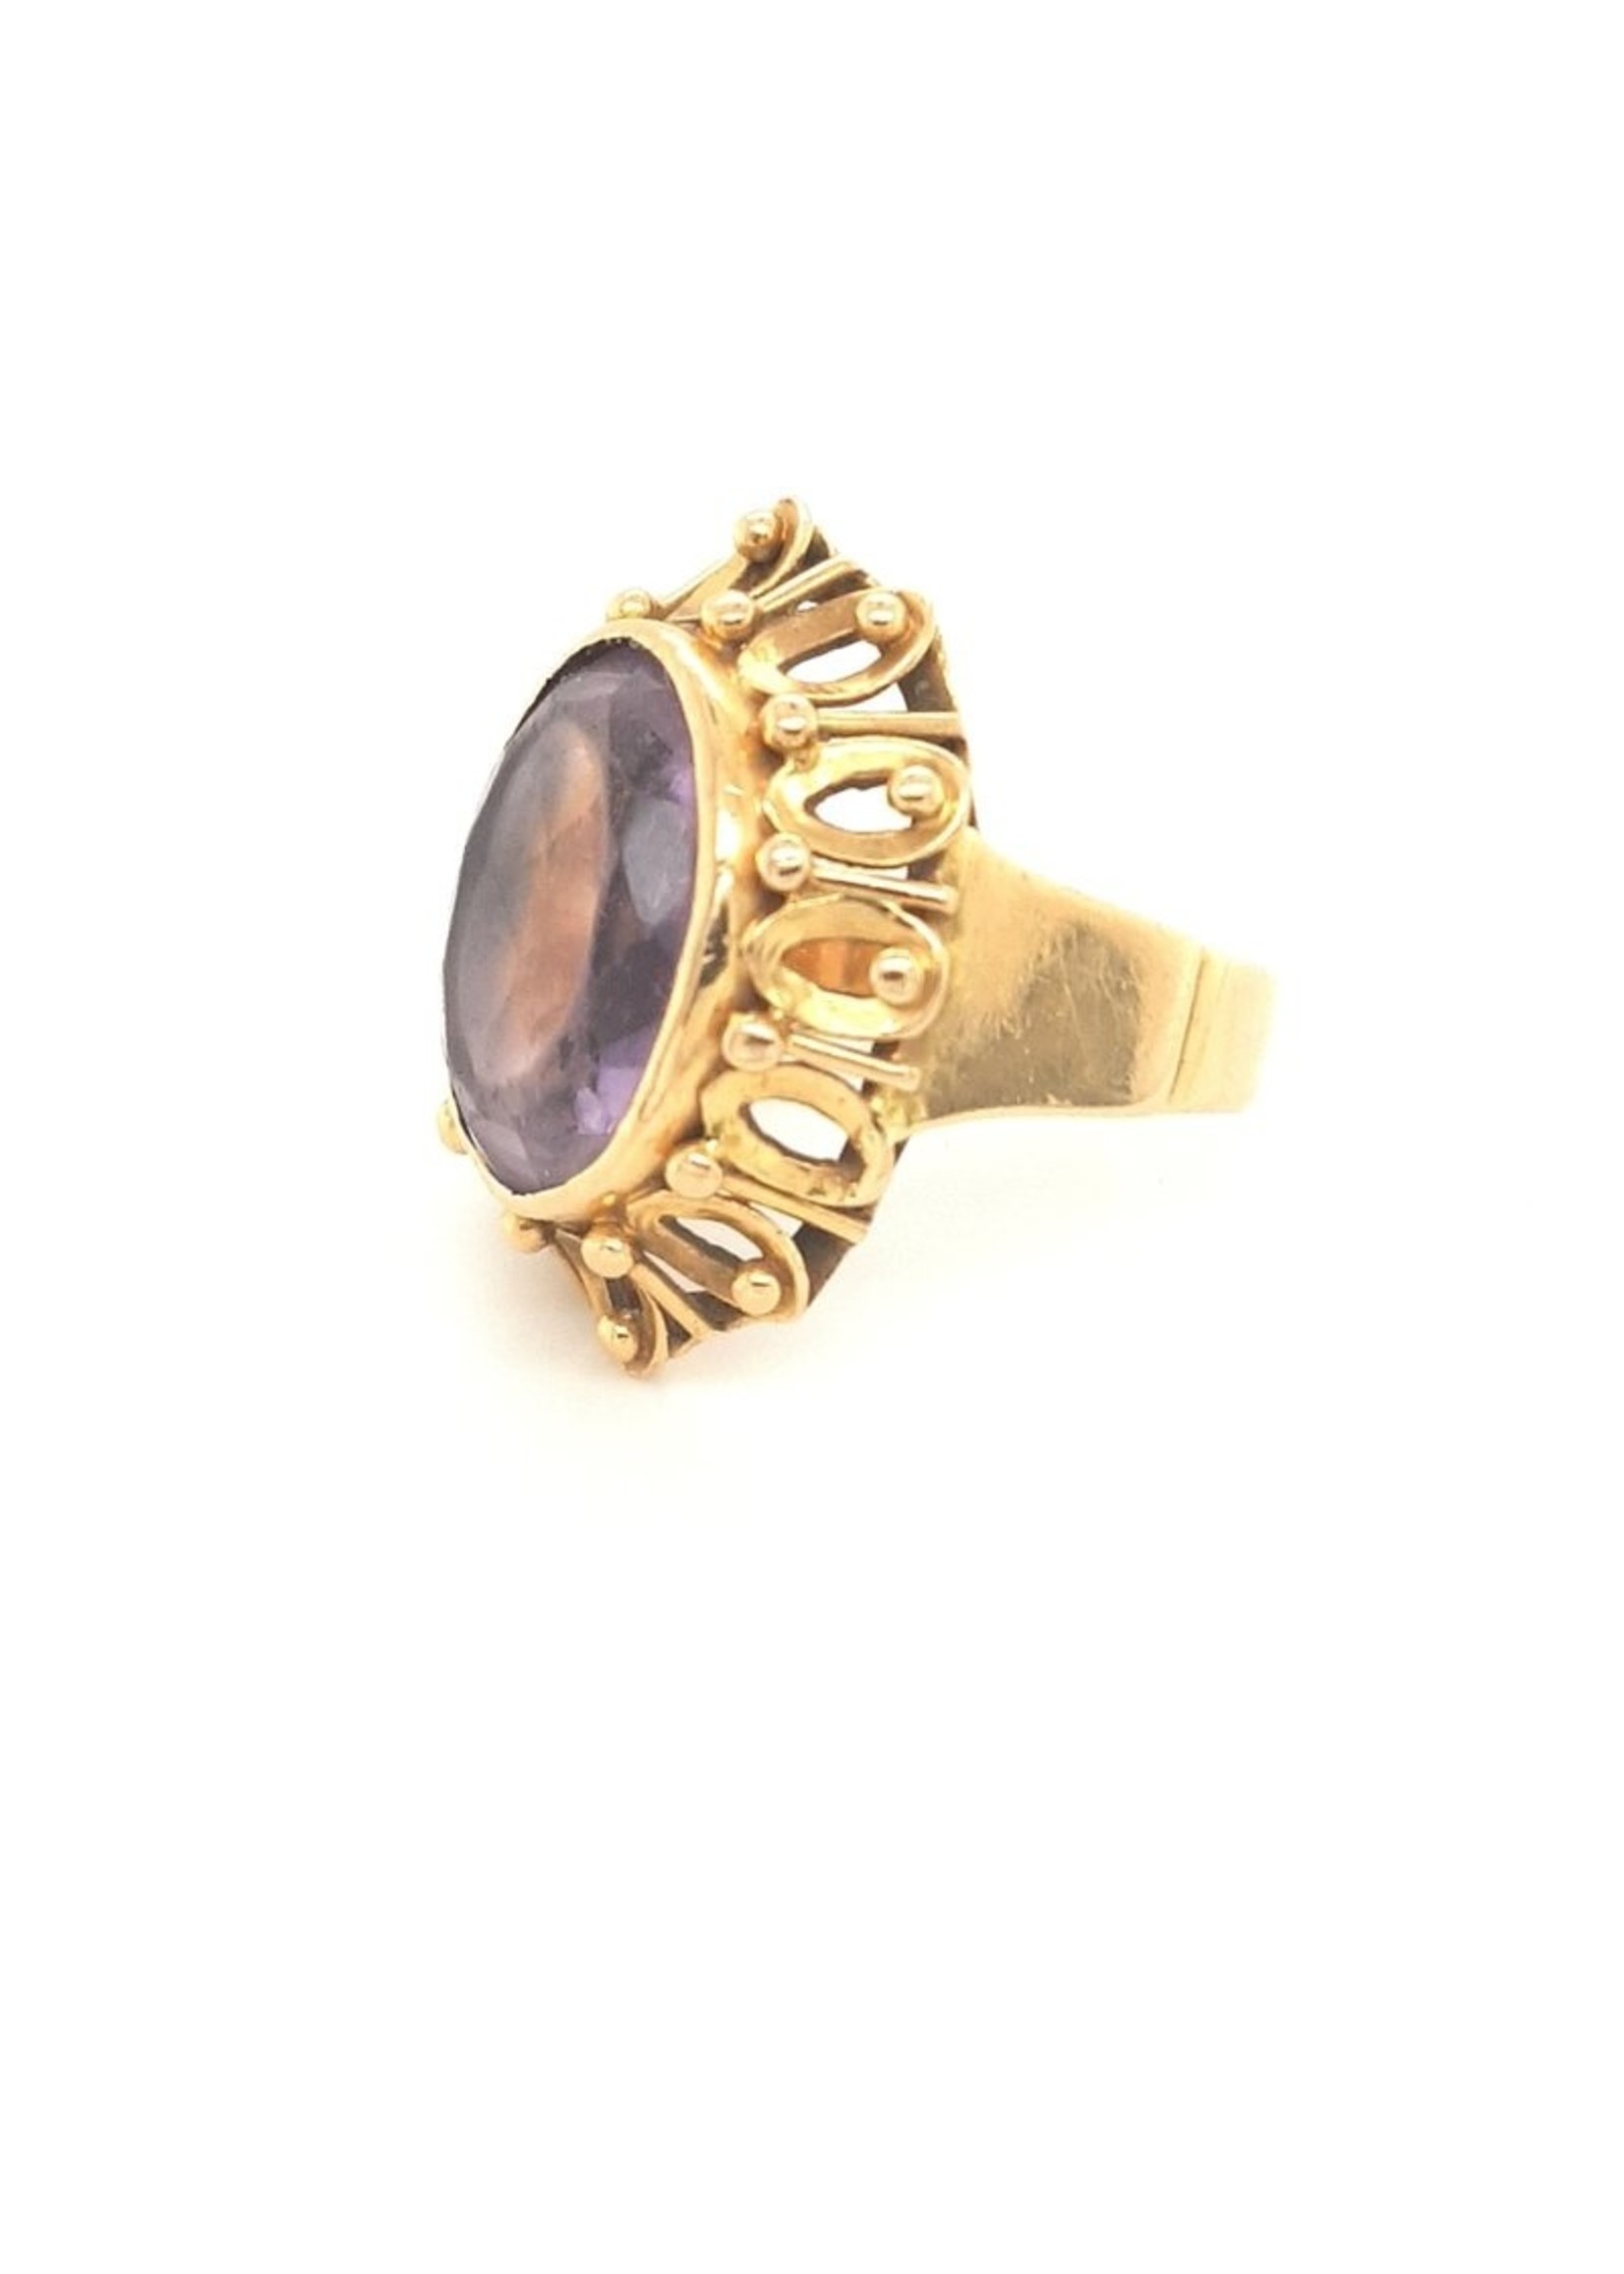 Vintage & Occasion Occasion gouden ring met paarse synthetische steen